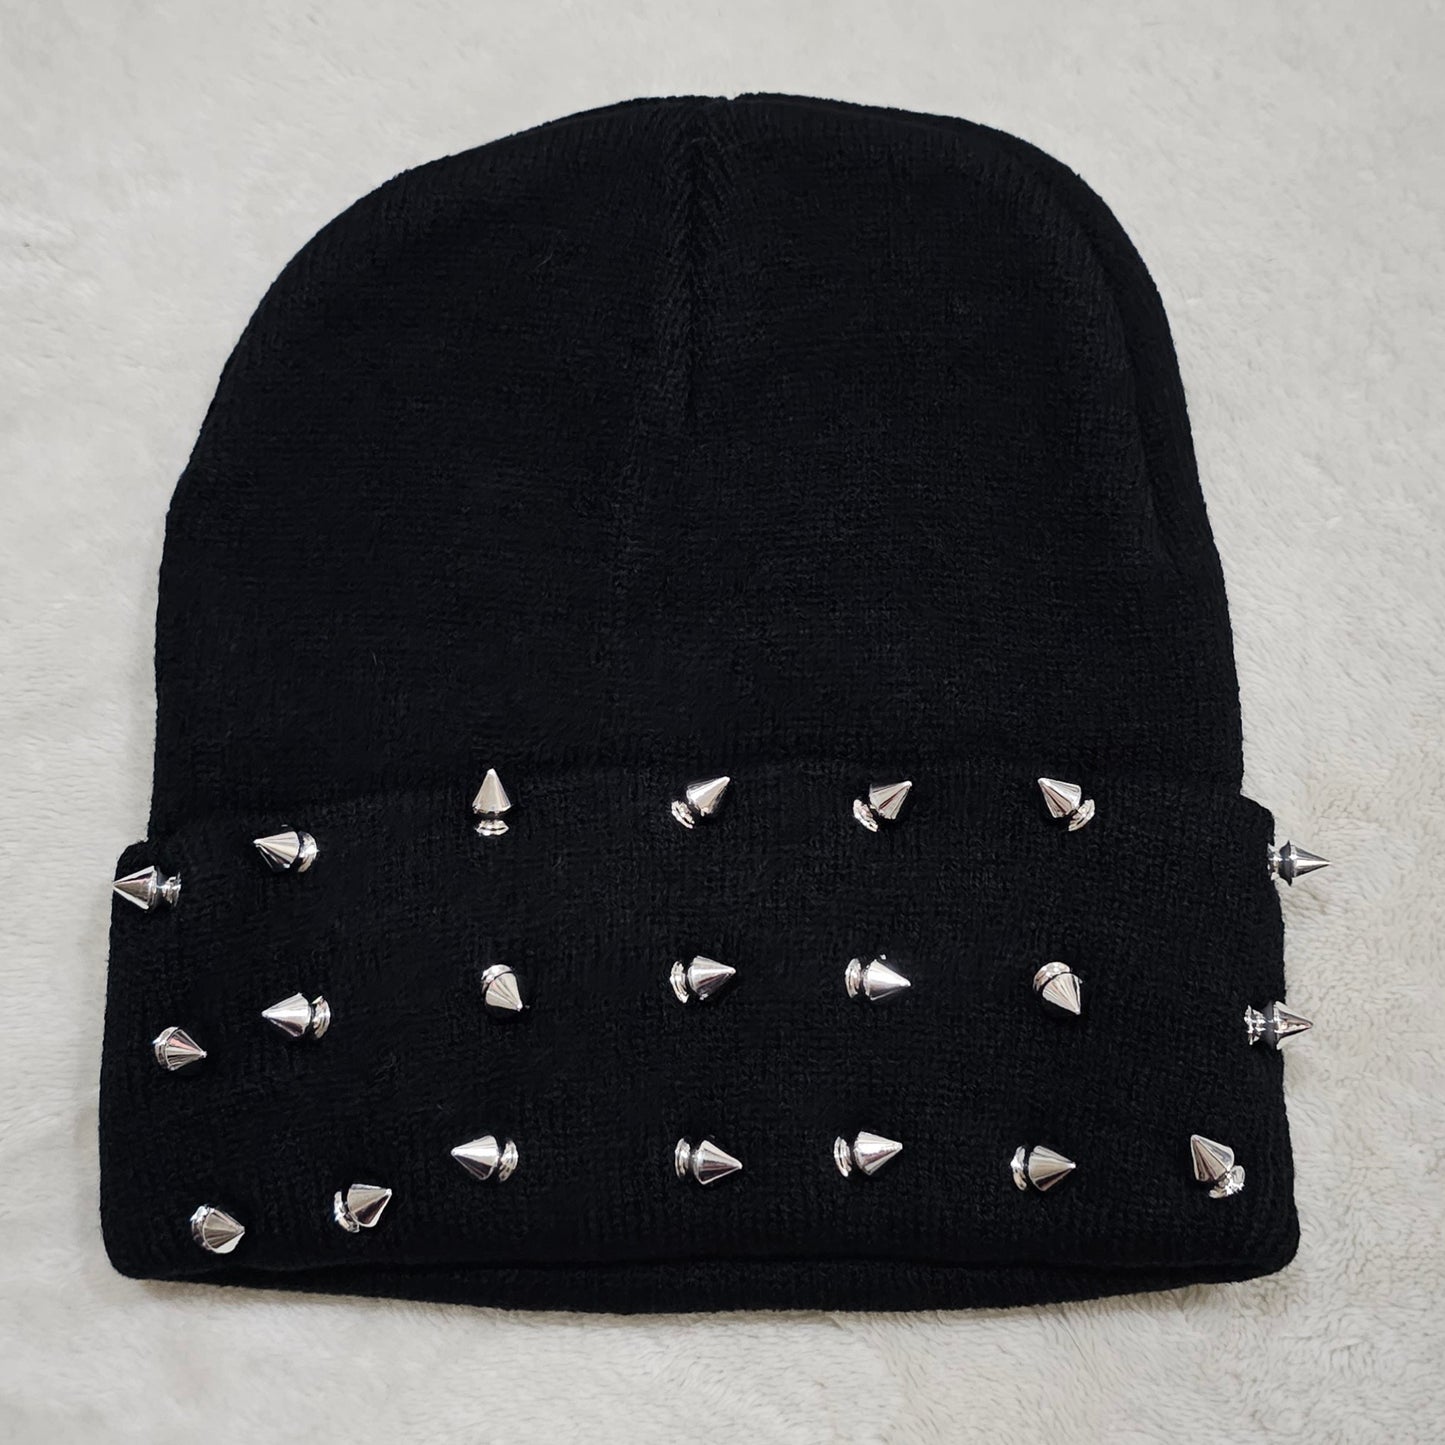 Black Ribbed Knit Beanie | Fold Over With Spiked Studs On front - Widow - Beanies